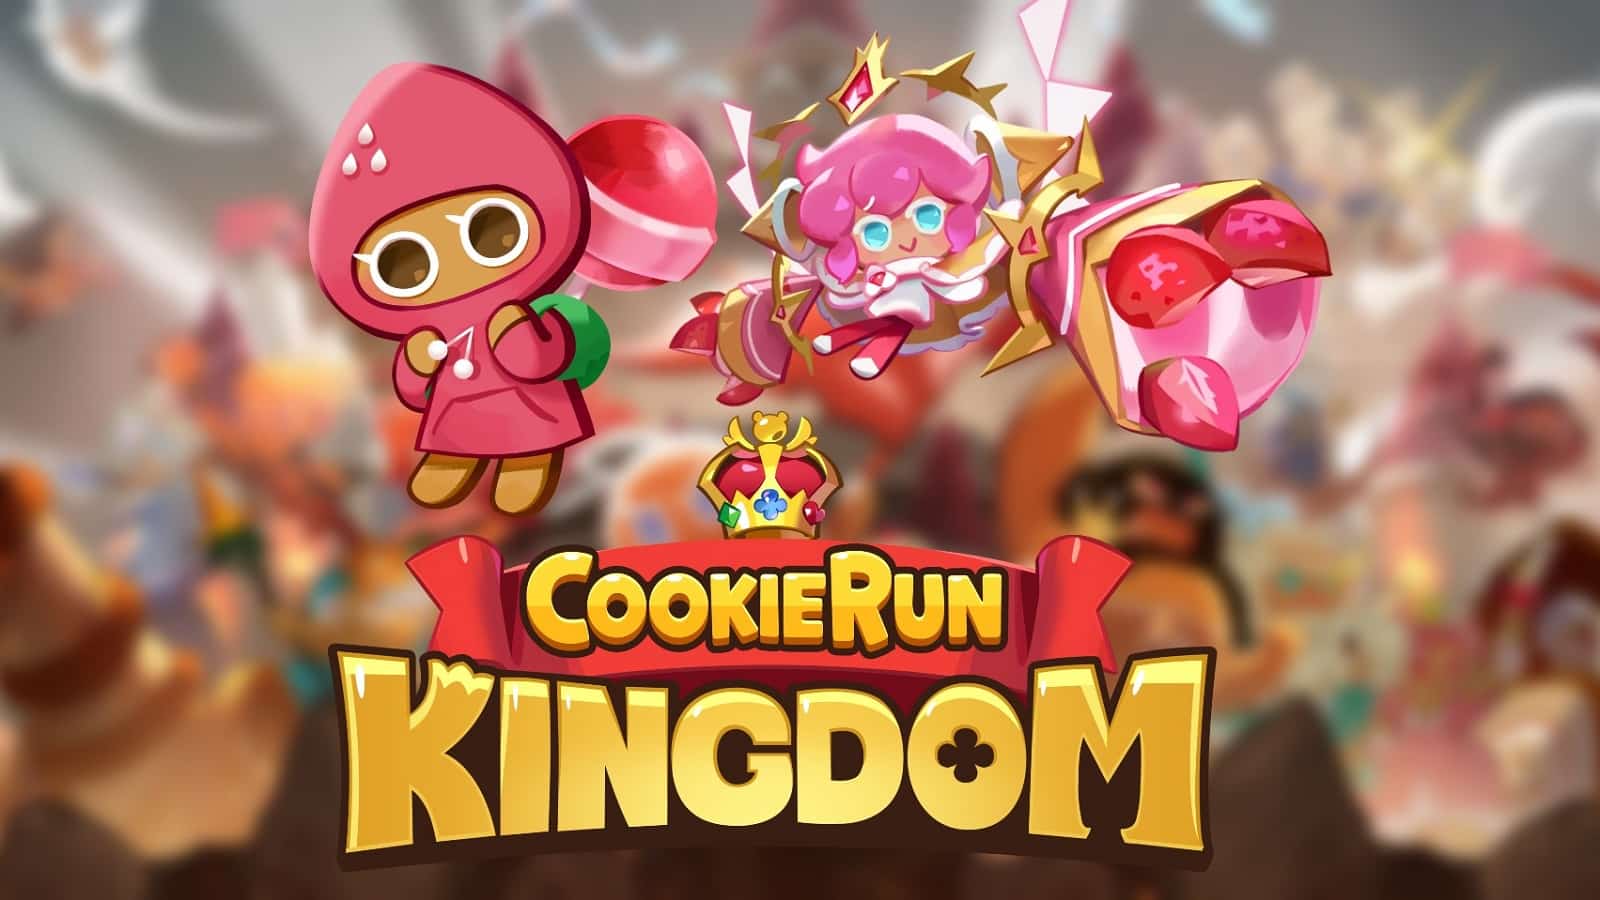 CookieRun Kingdom on Twitter April showers bring May flowers   Celebrate the month of May with art of the Hollyberry royal family PC and  mobile phone wallpapers are available for download Enjoy 